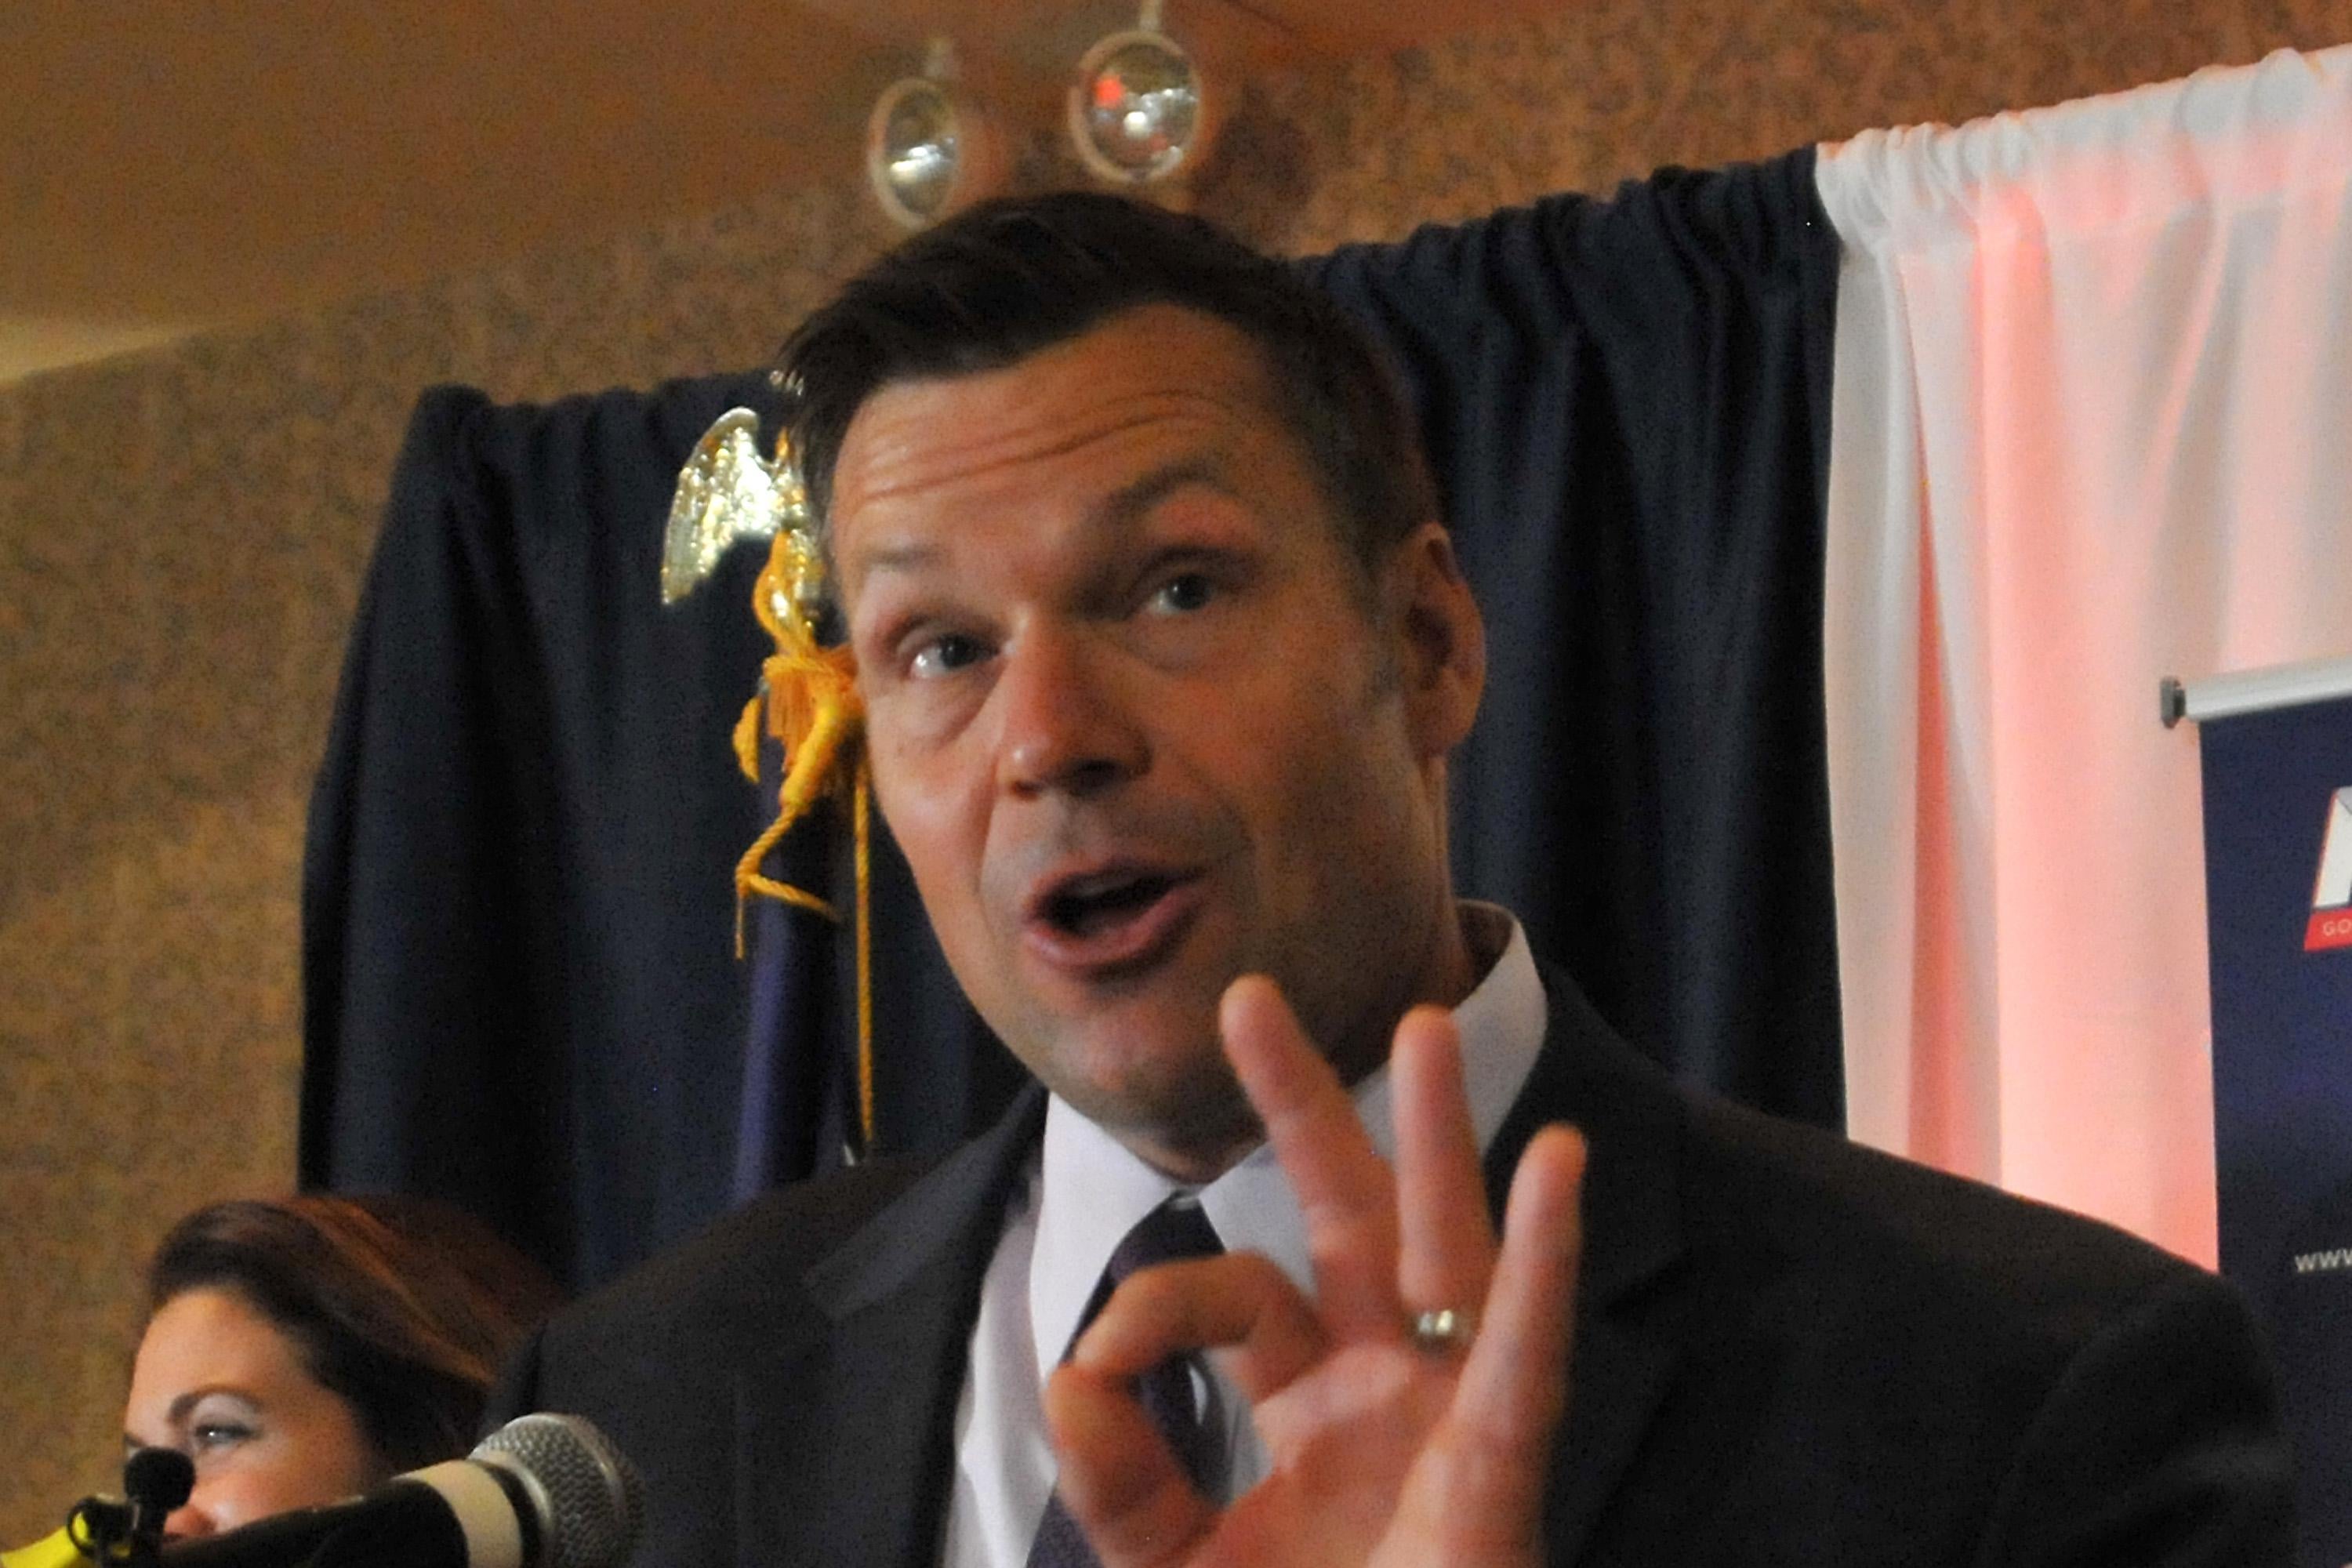 Kris Kobach speaks at a microphone and makes a gesture with his hand.